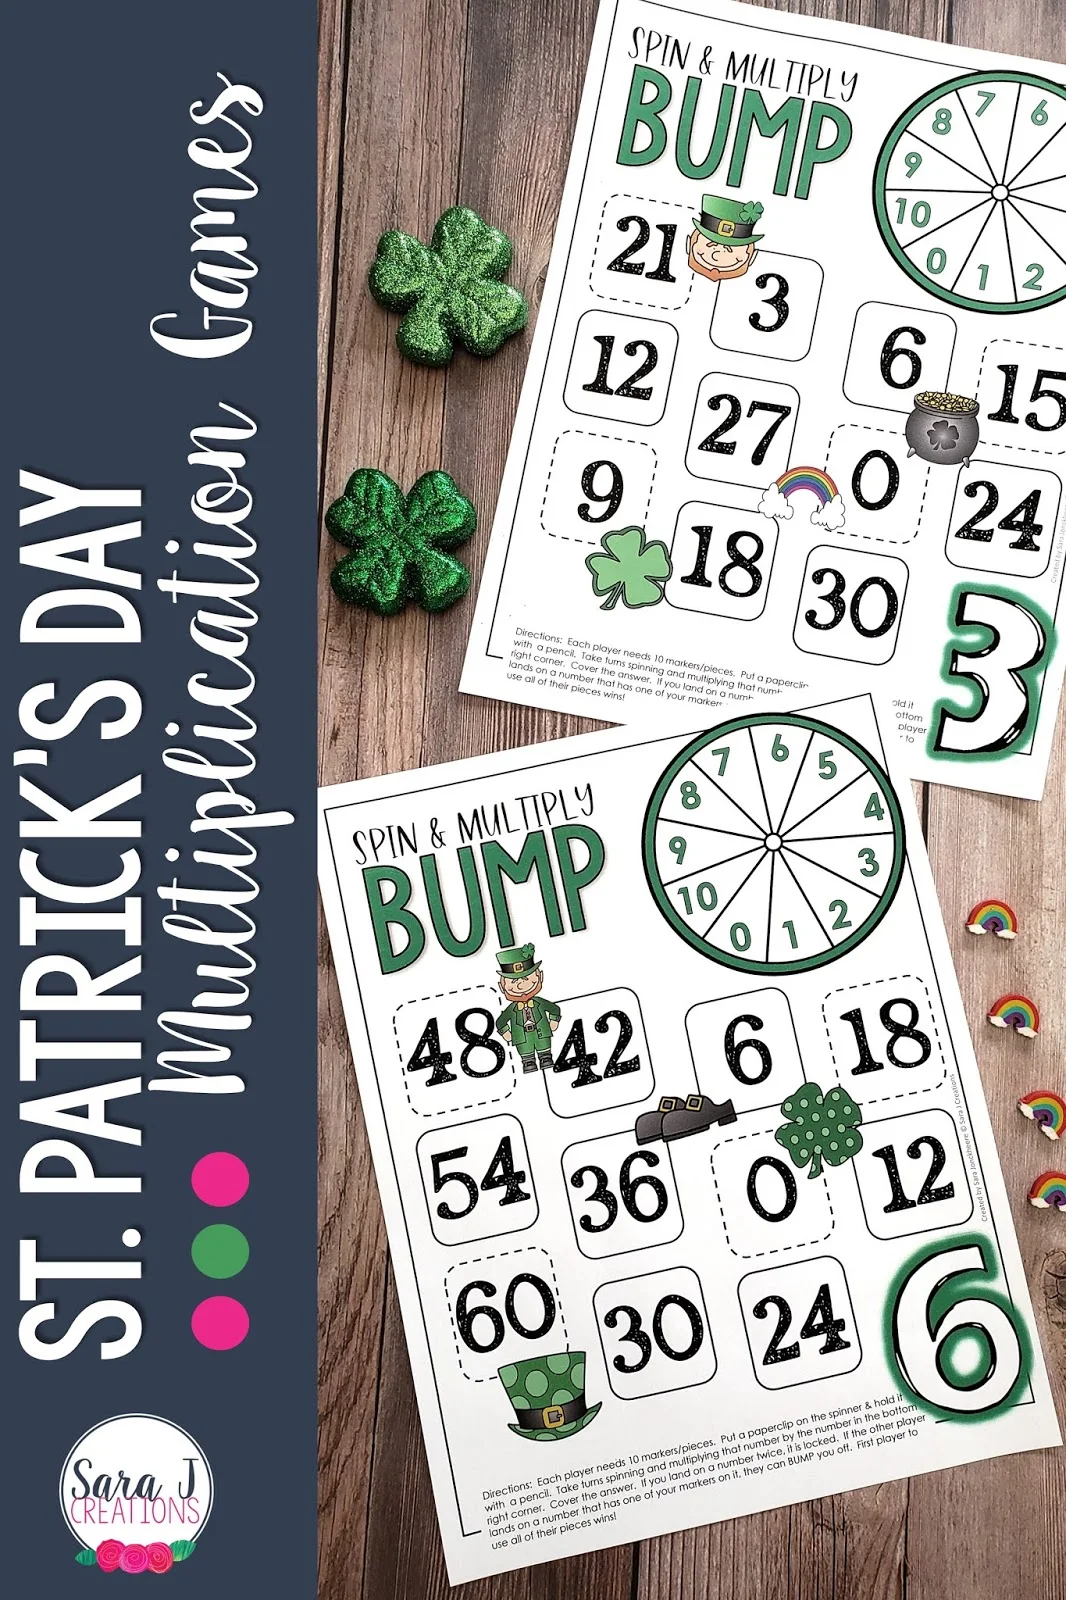 St. Patrick's Day Multiplication Bump is the perfect way to practice math facts in a fun and festive way. These games are perfect for kids in second grade, third grade, or even fourth grade and beyond. Download, print, and play!! Try out the FREE sample.